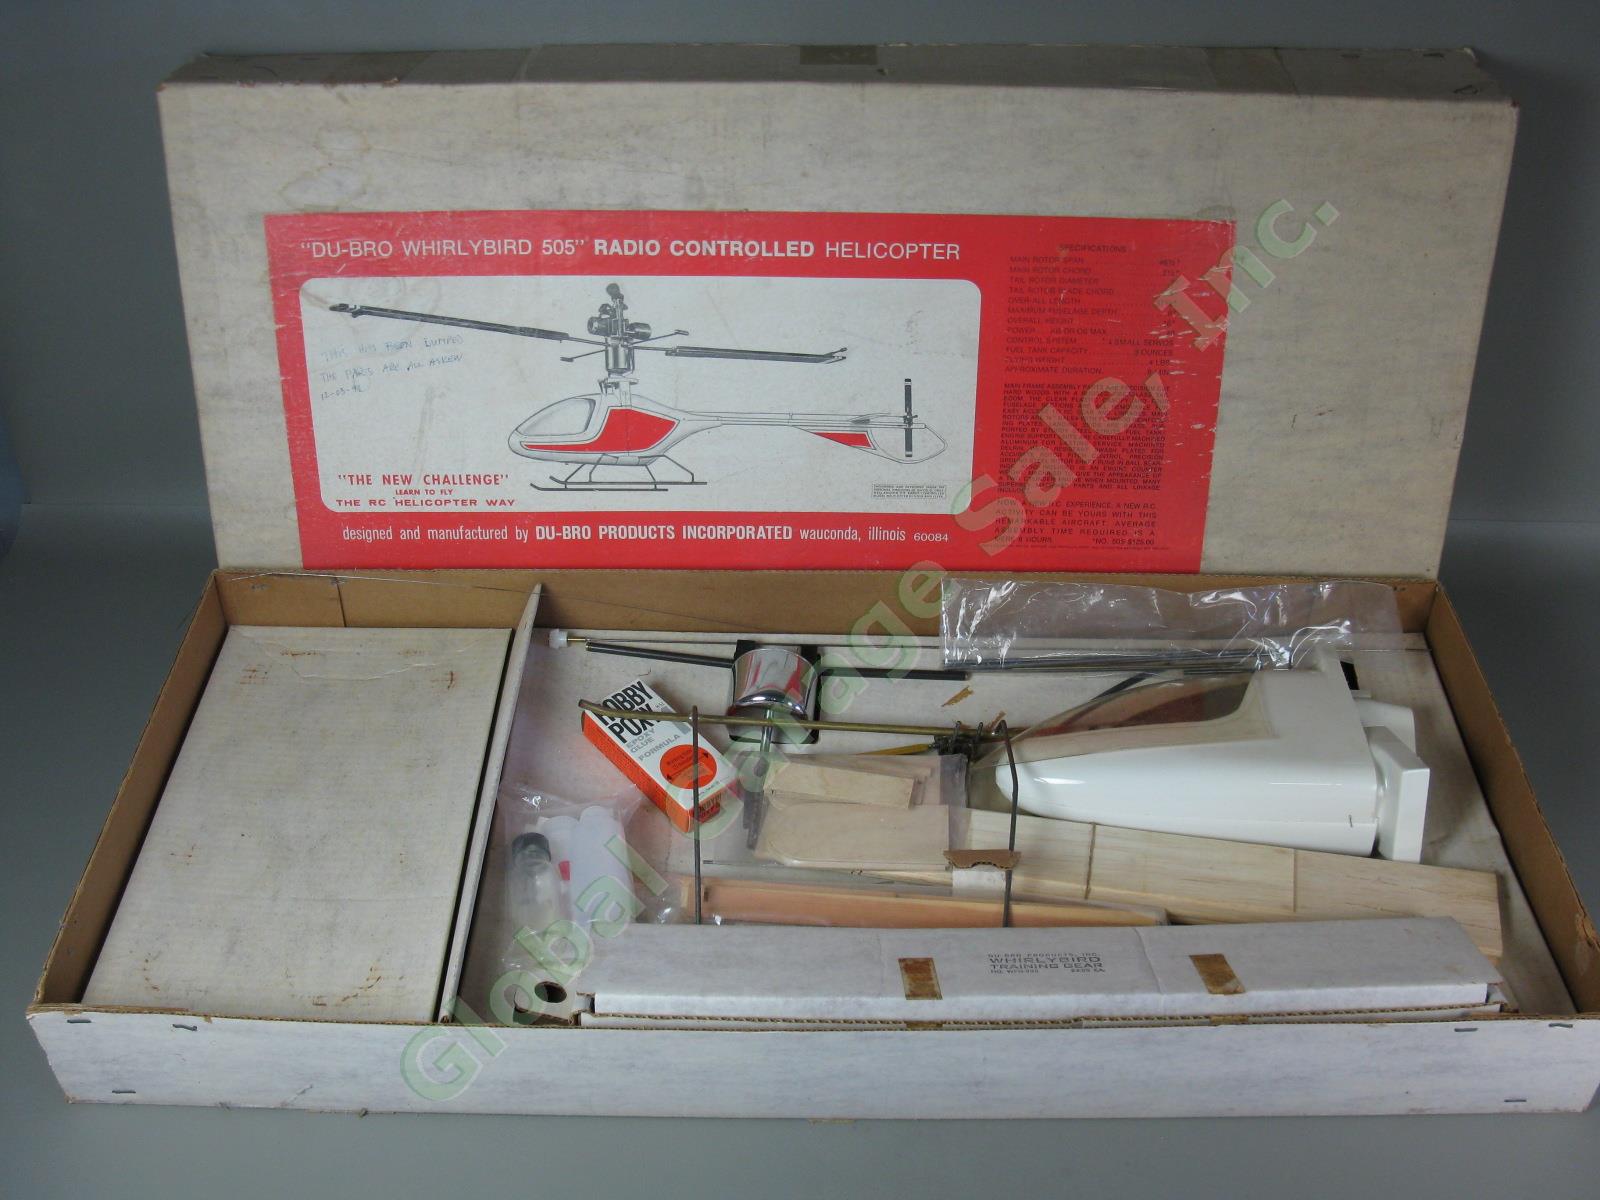 Vtg Du-Bro Whirlybird 505 RC Radio Control Helicopter Kit w/Box + Manual NO RES!